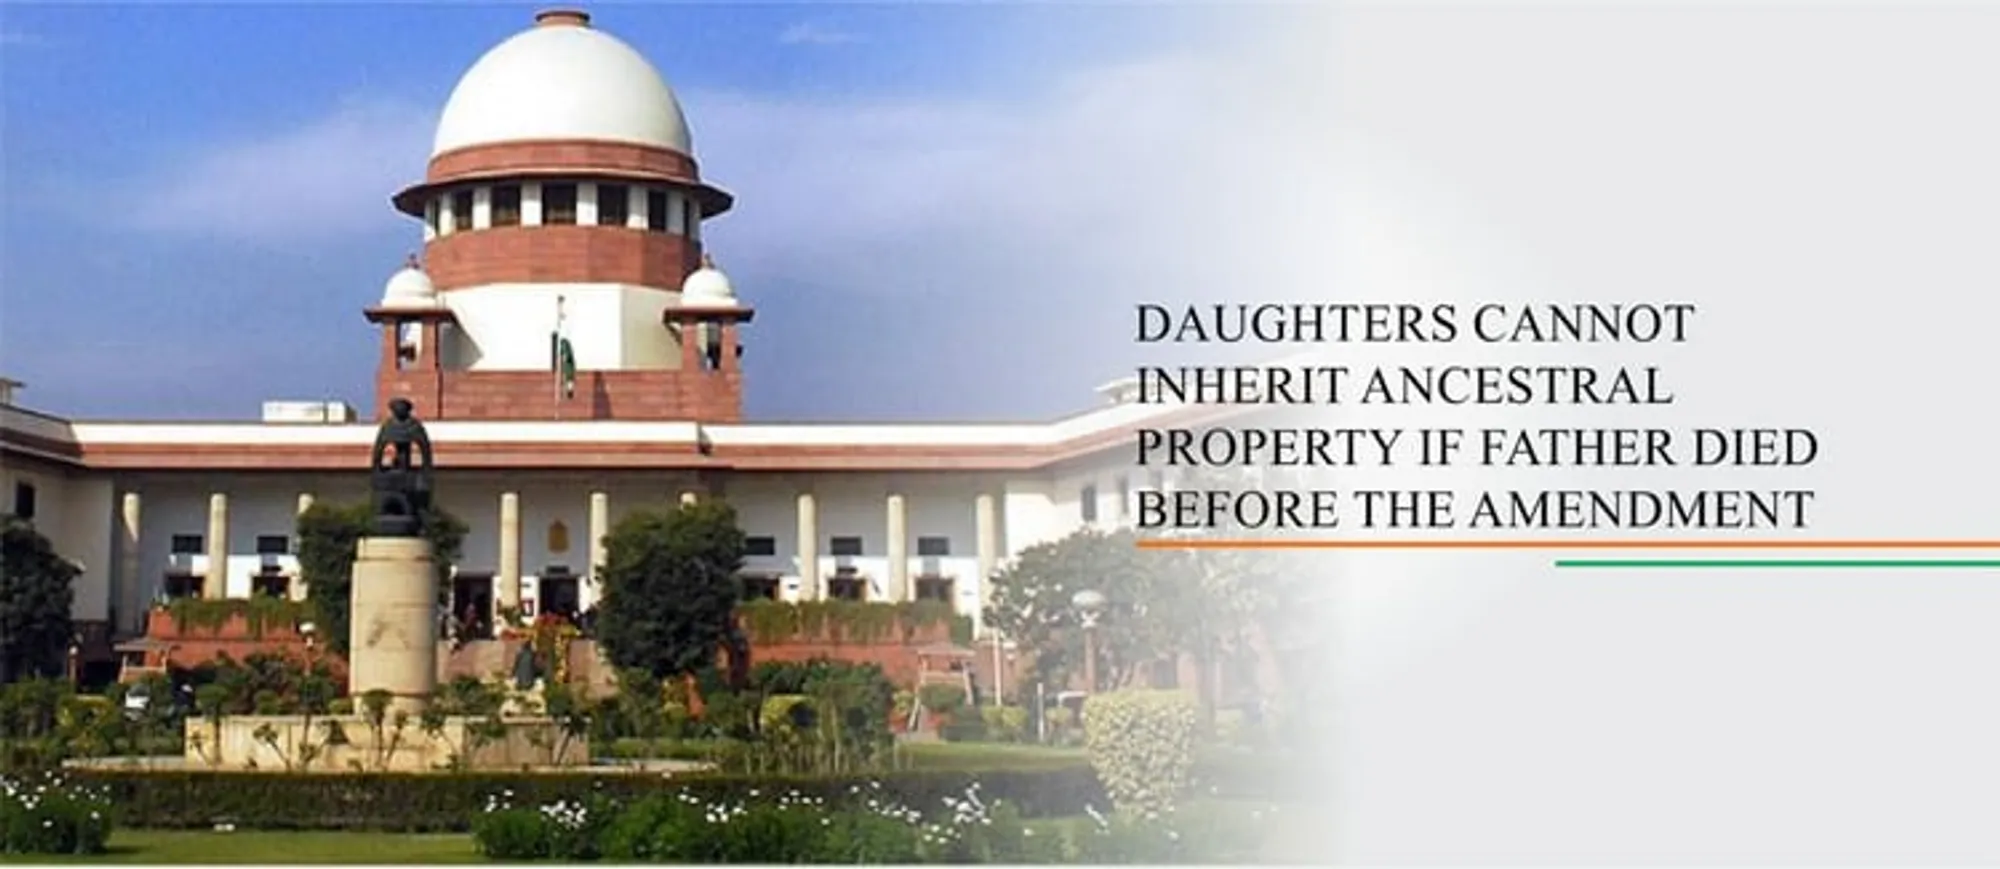 Daughters cannot inherit ancestral property if father died before 09.09. 2005